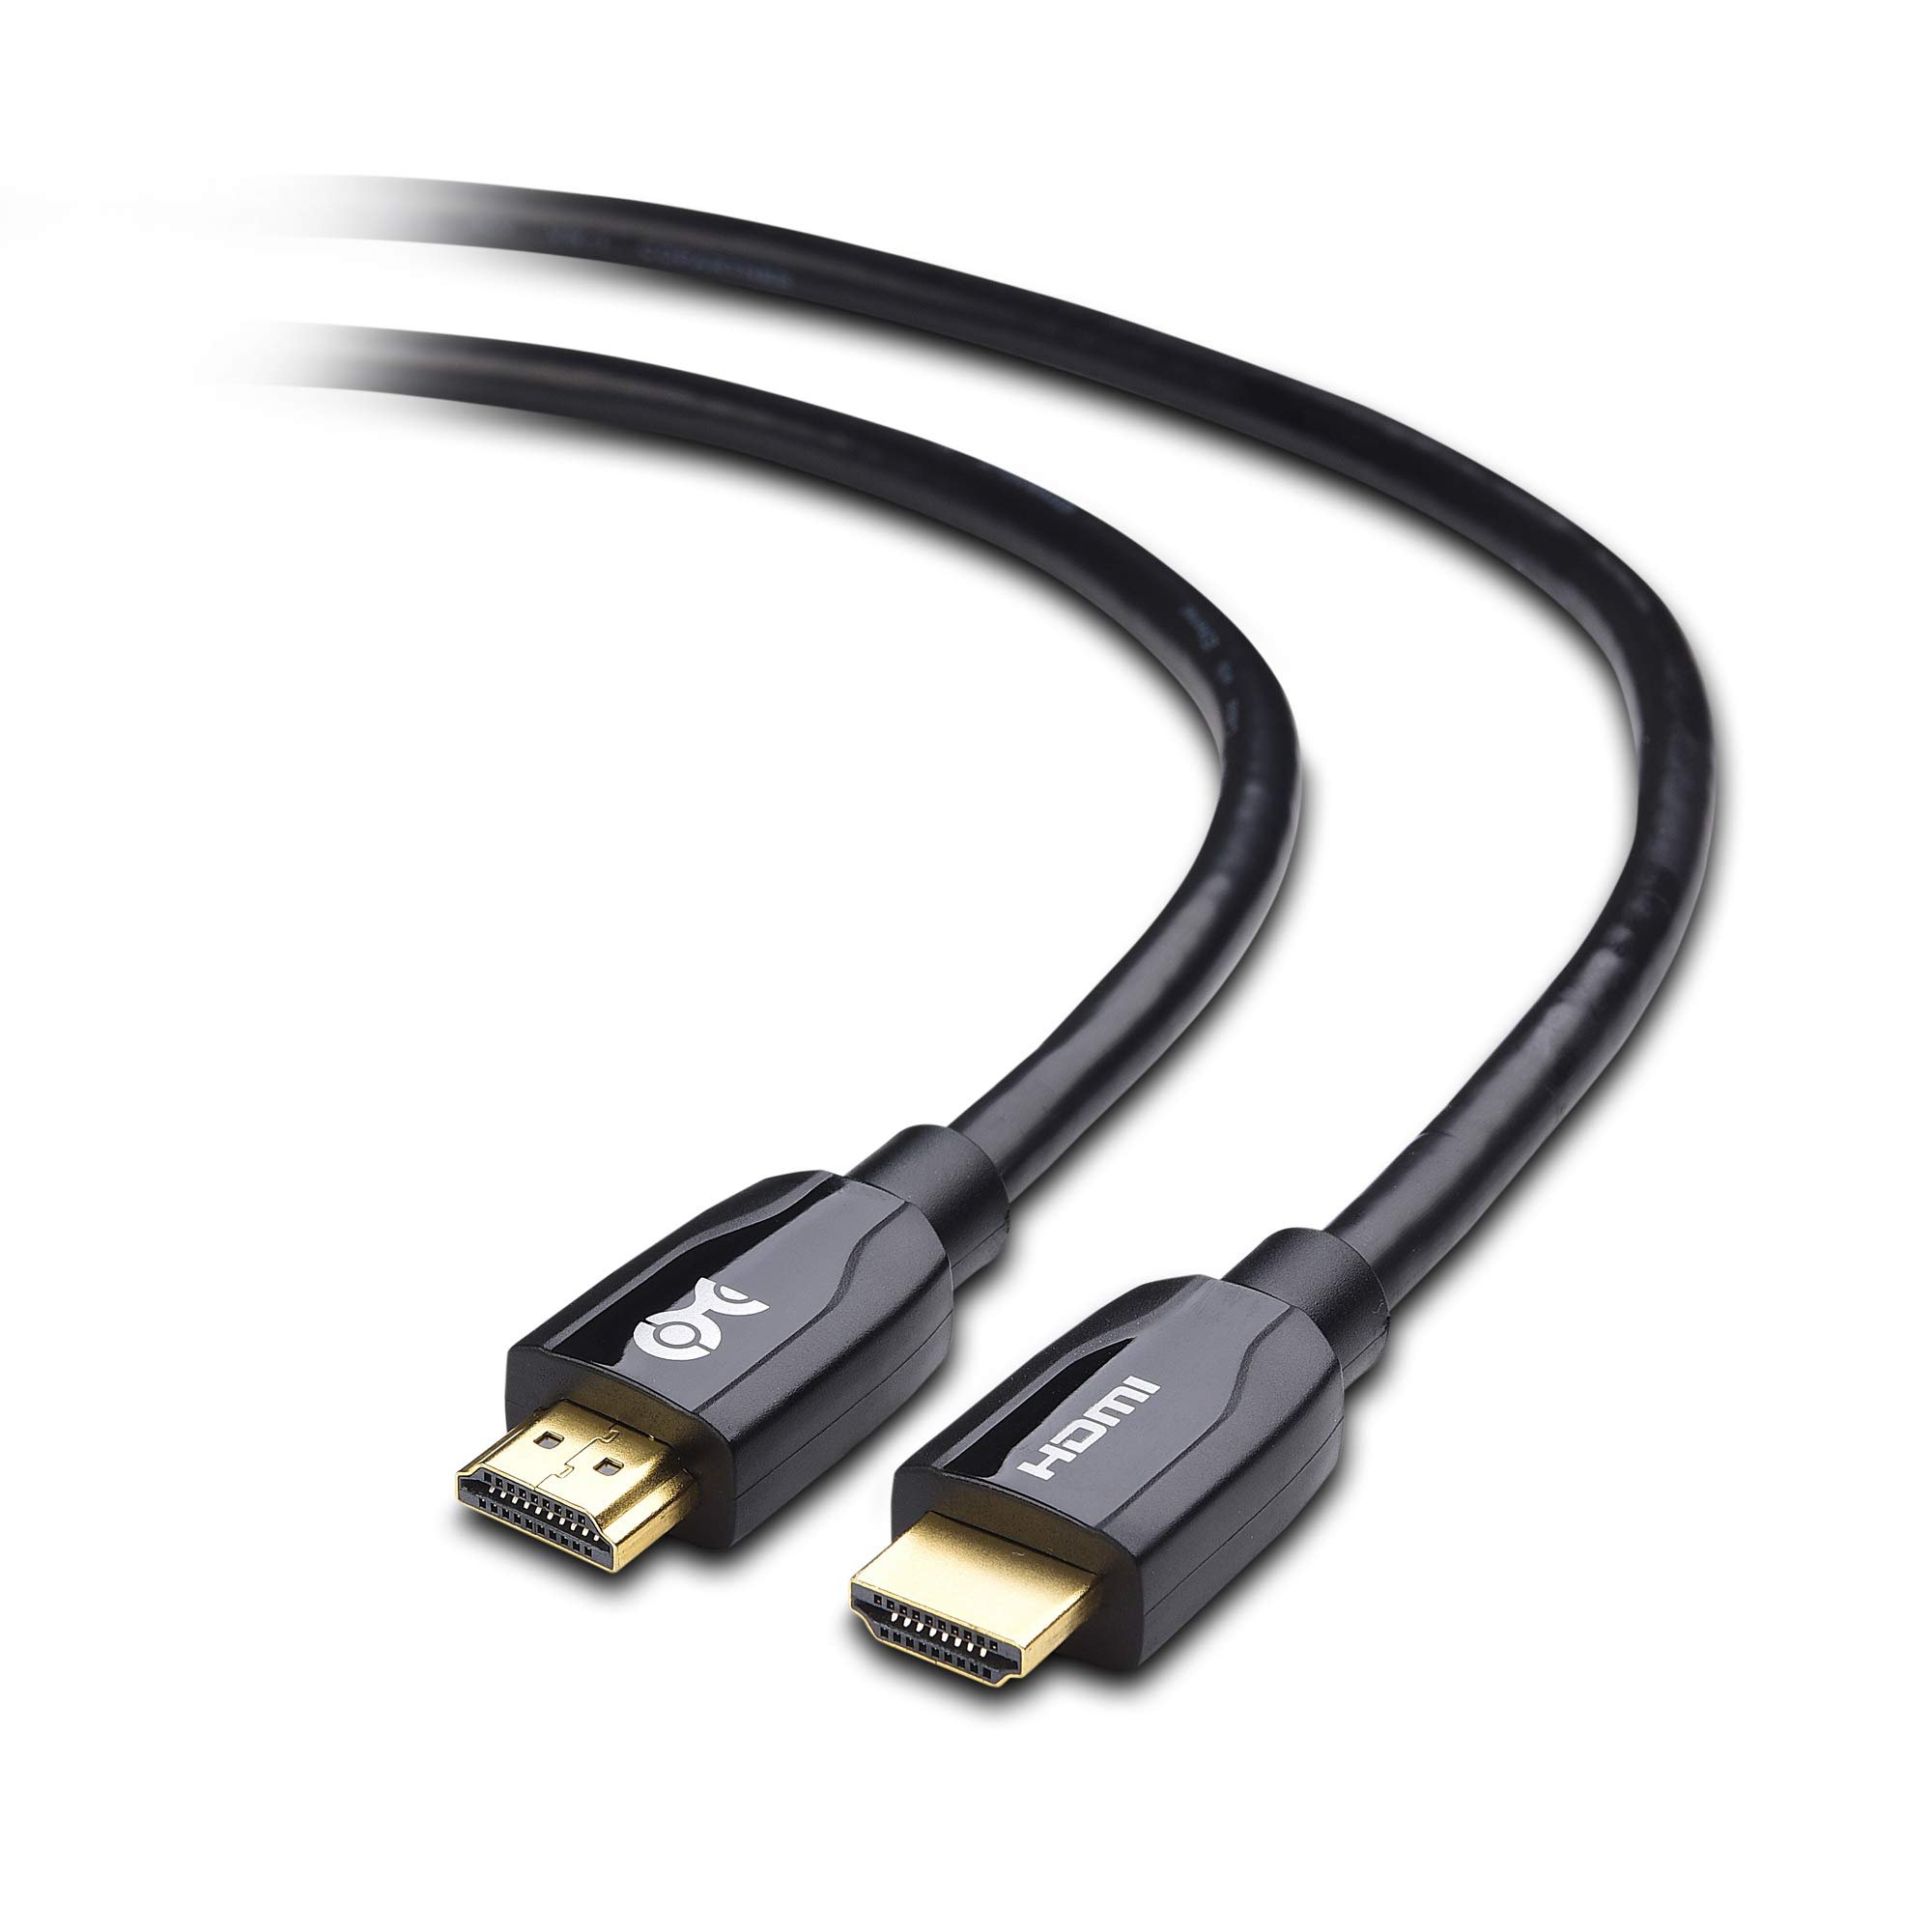 Book Cover Cable Matters [Premium Certified] HDMI to HDMI Cable 15 ft (Premium HDMI Cable) with 4K HDR Support in Black 15 ft Black